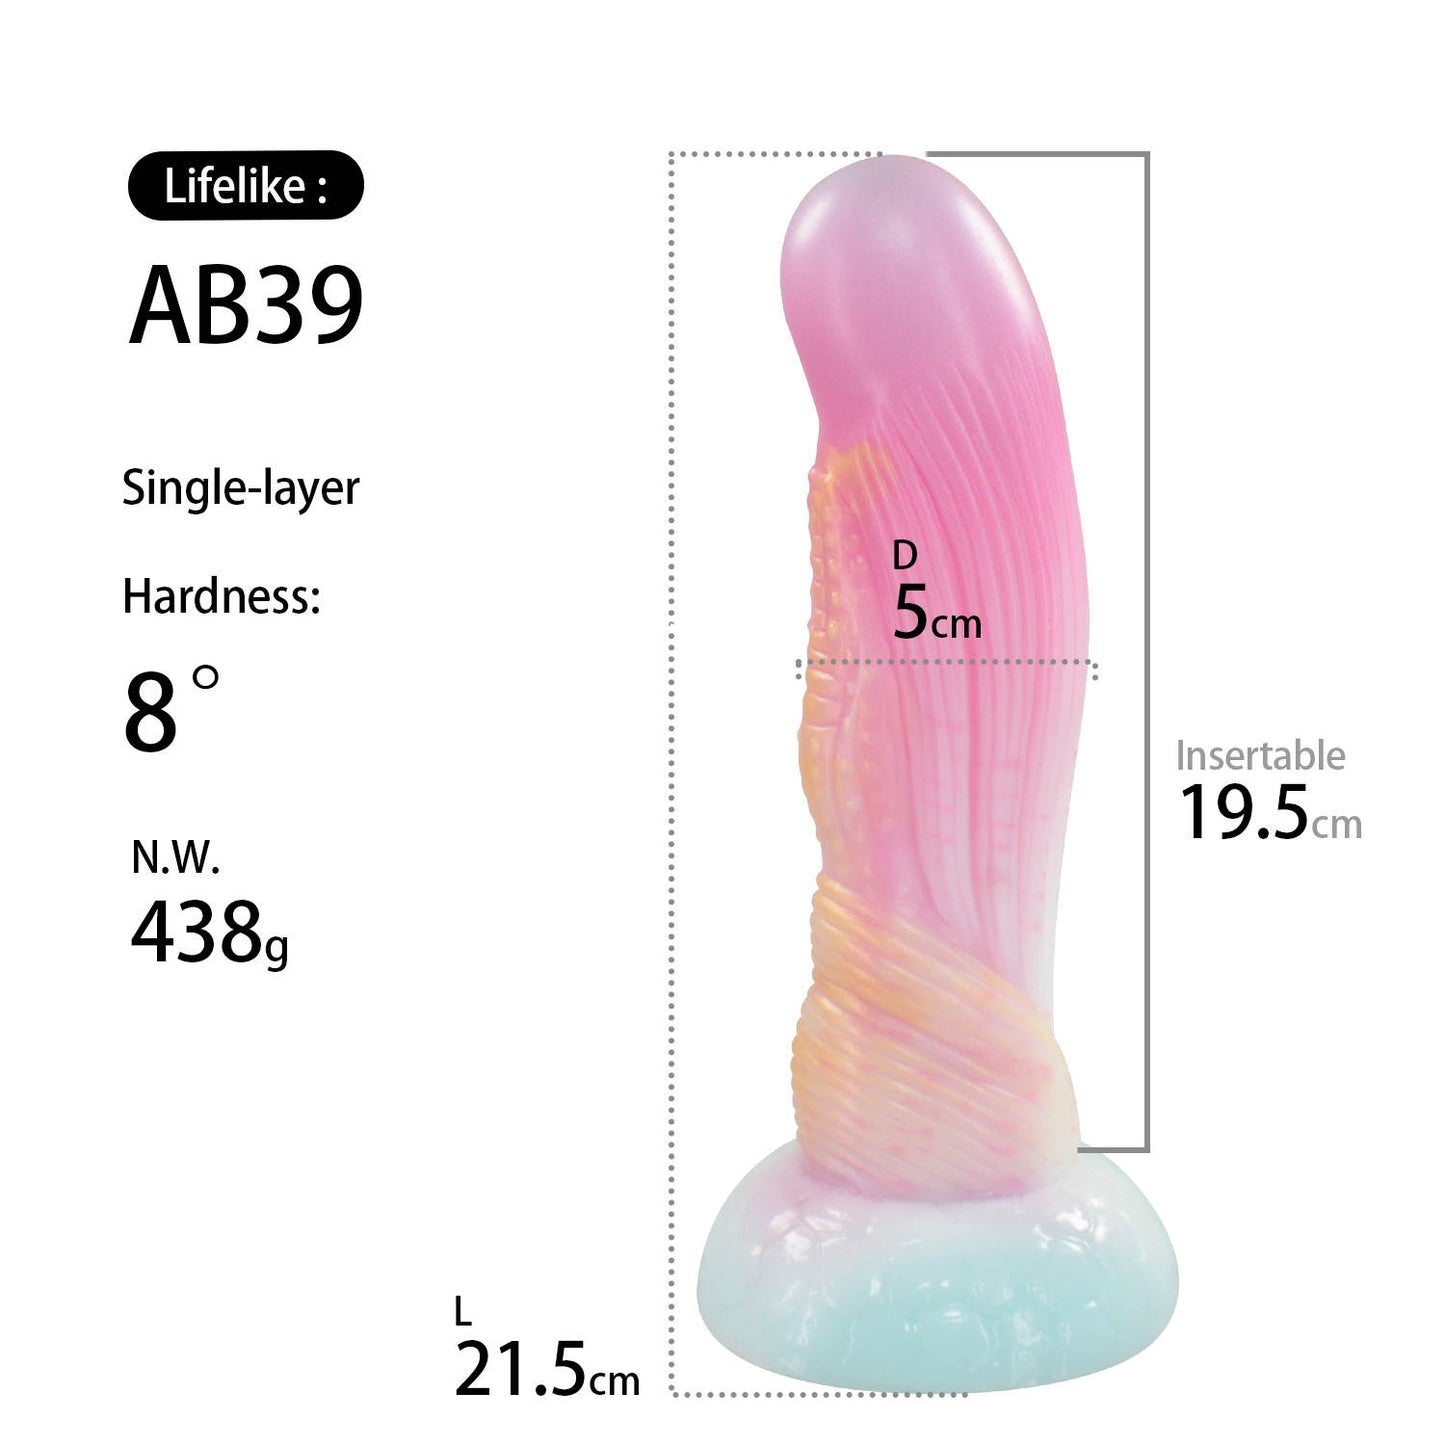 Fantasy Thick Dildo 8.5 inch - Elf Soft Silicone Bud Flower Dildo - Larva Adult Sex Toy - Colorful Good Dragon Dildo - Muscle Cock